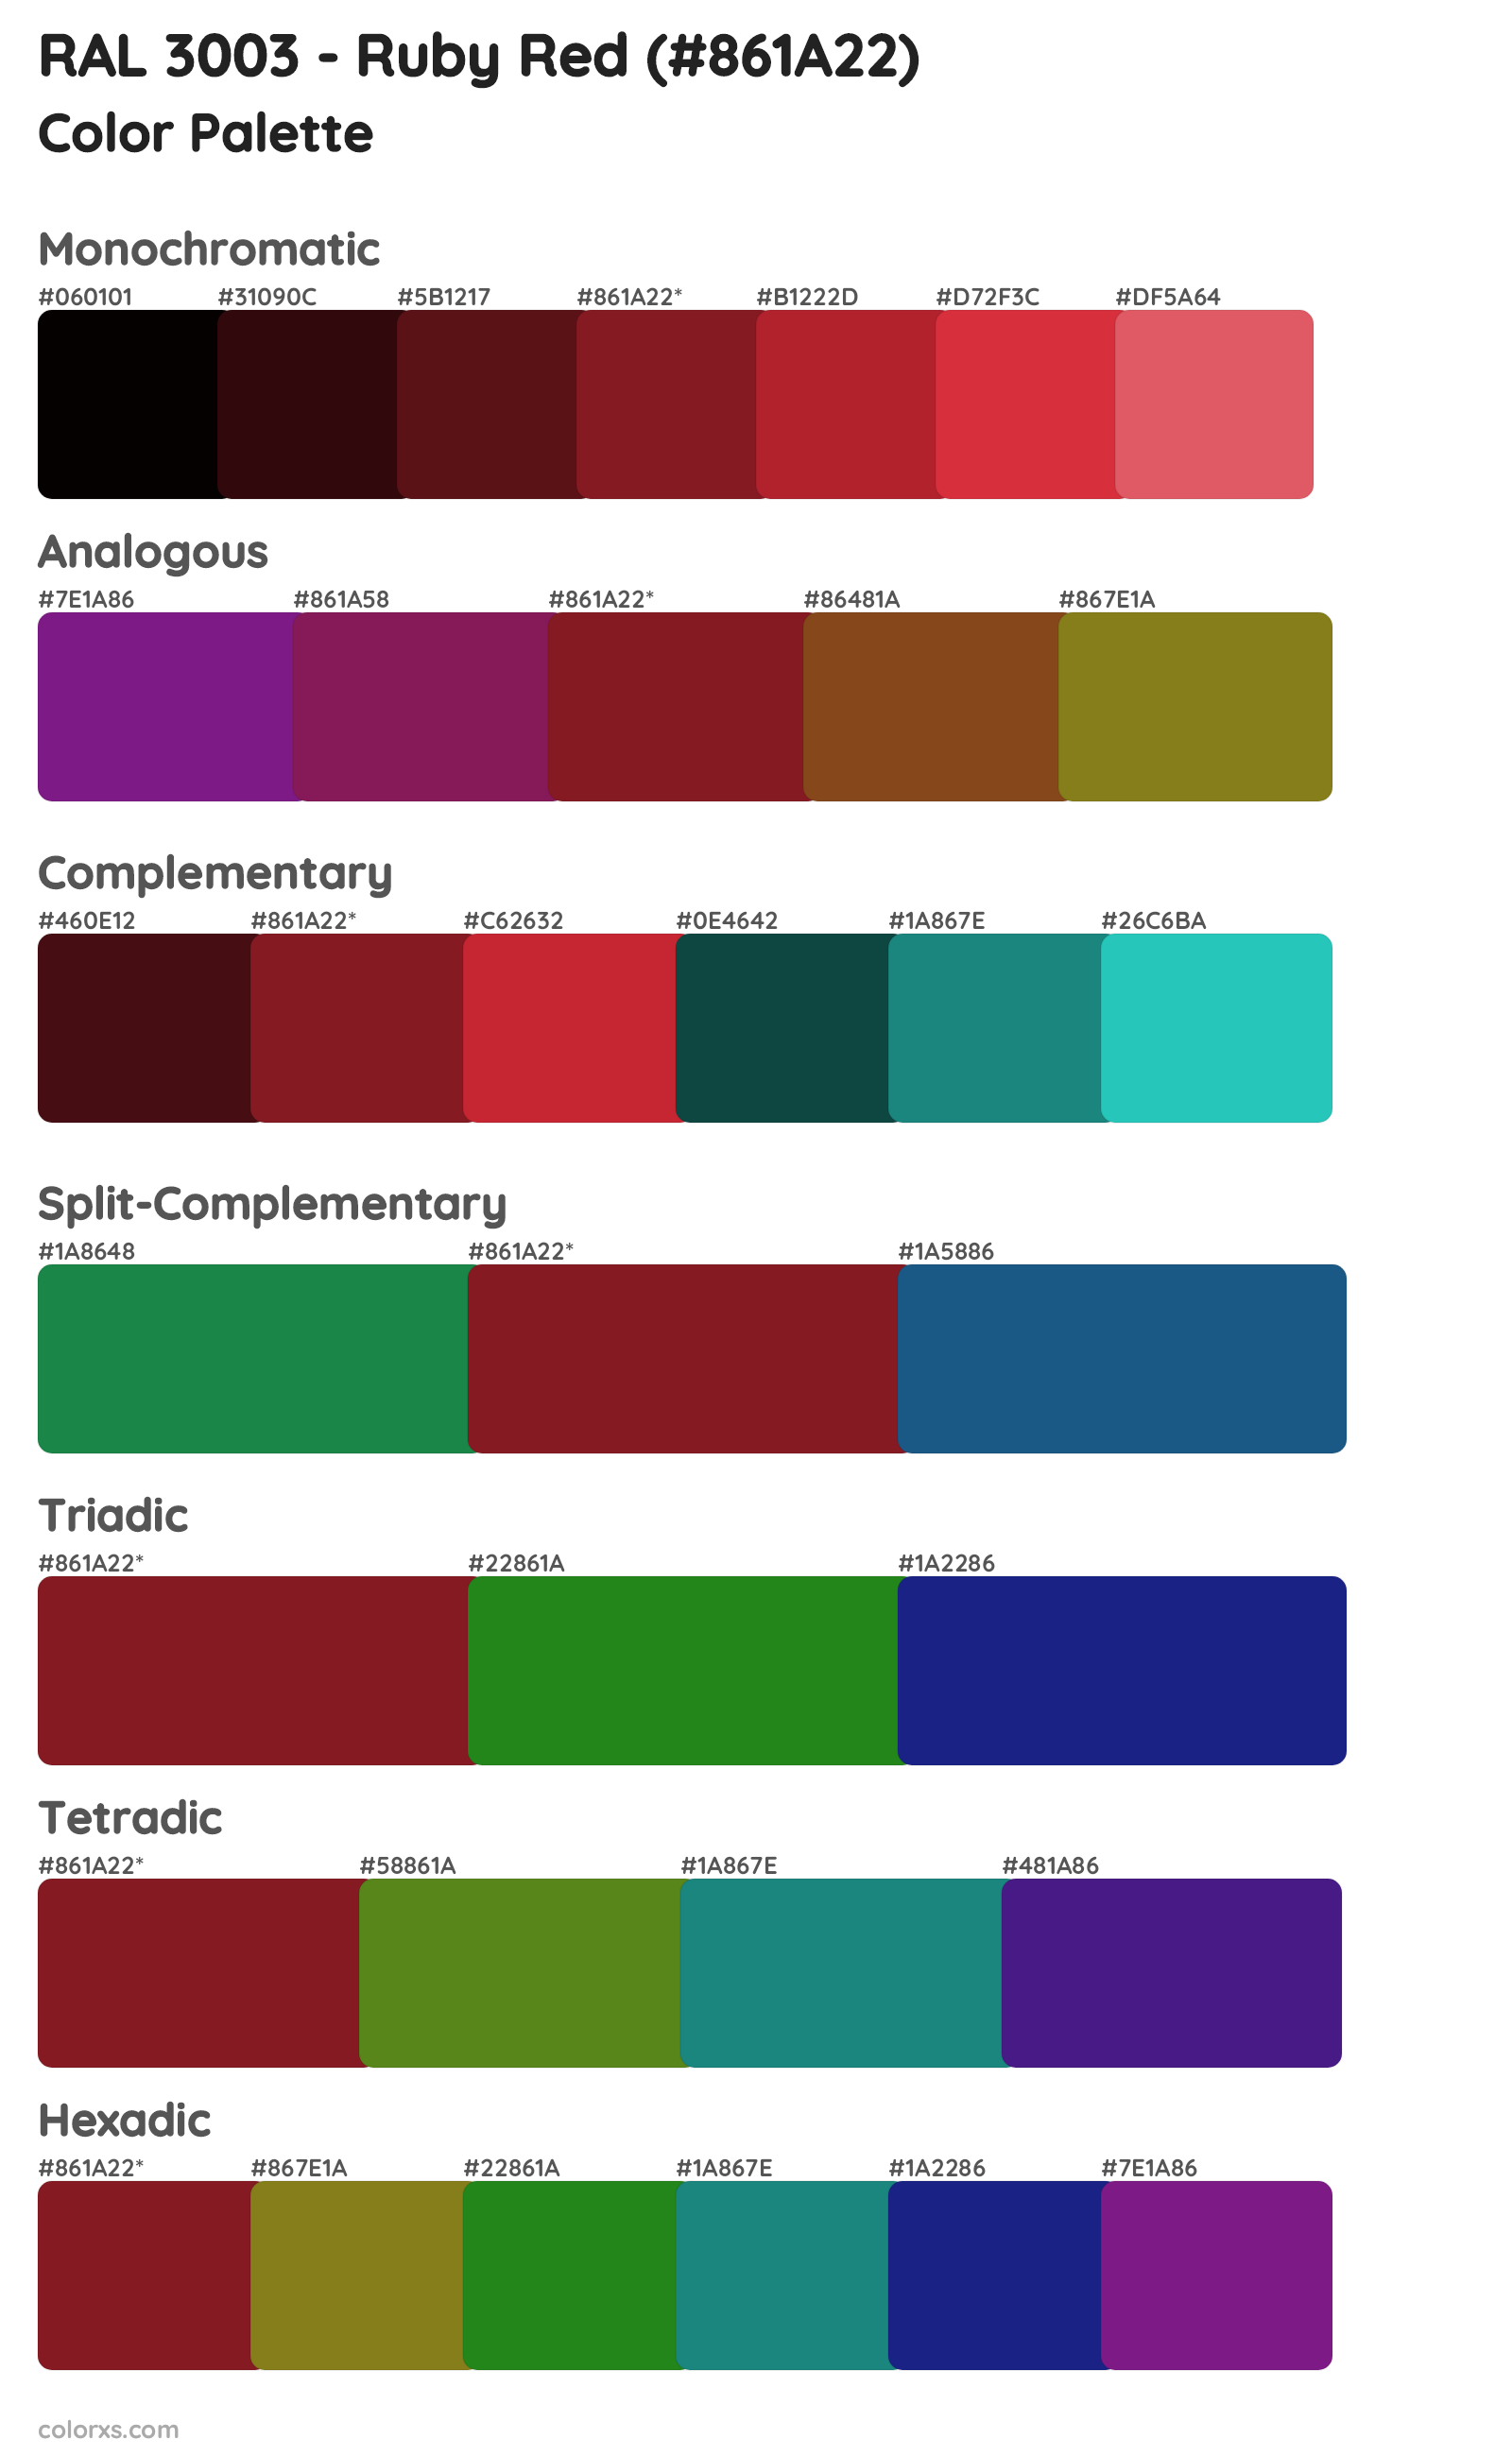 RAL 3003 - Ruby Red Color Scheme Palettes